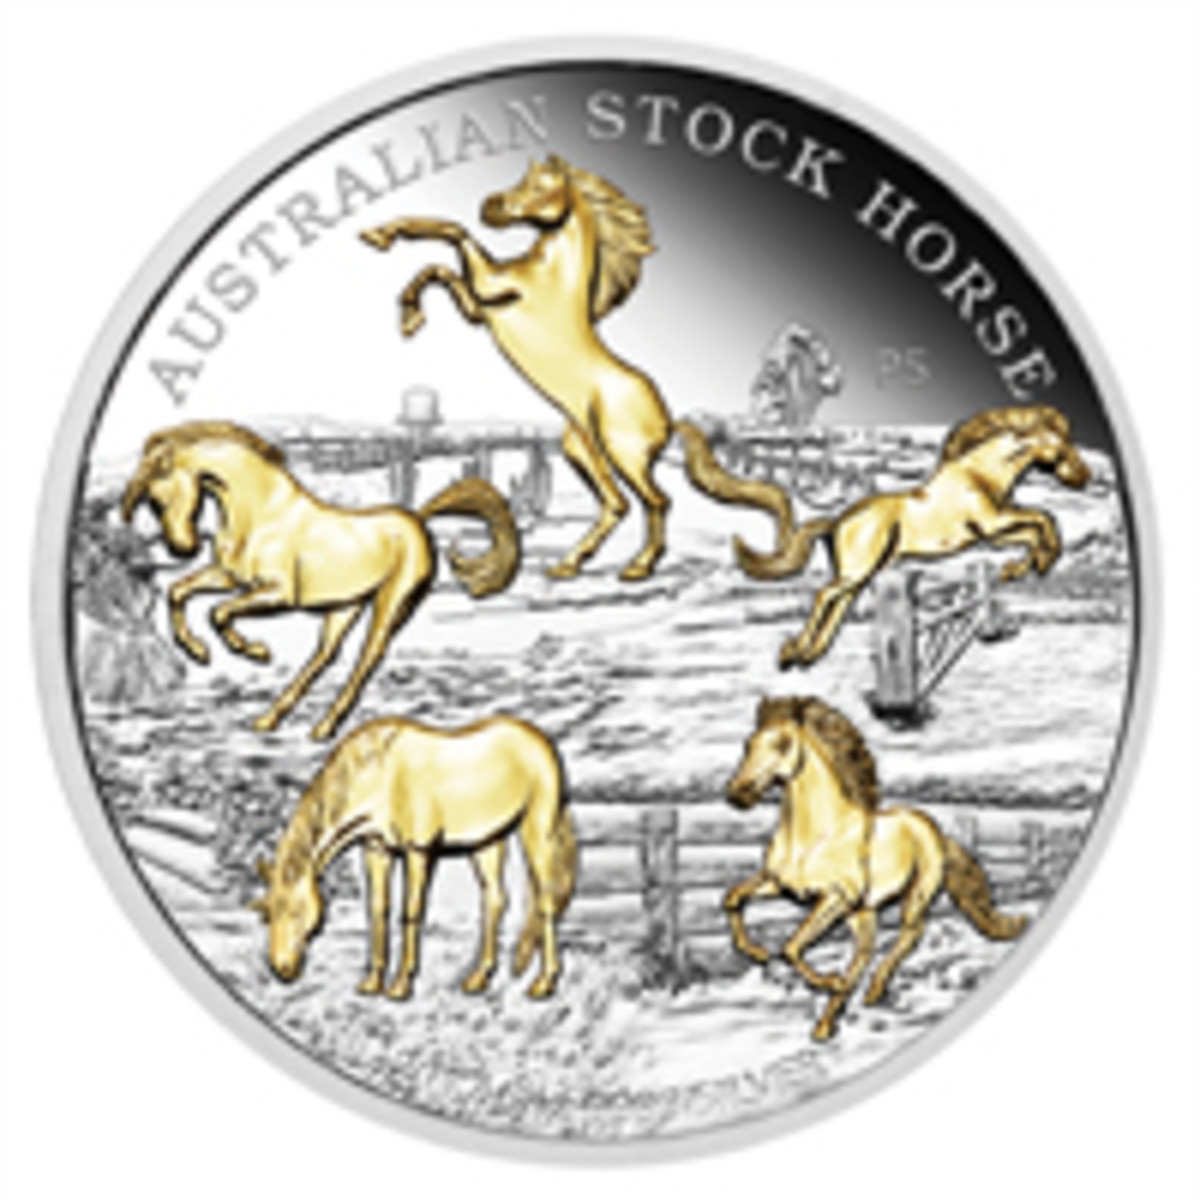  A montage of Australian Stock Horses in action and repose grace this 5 oz gilded silver proof $8. (Image courtesy The Perth Mint)